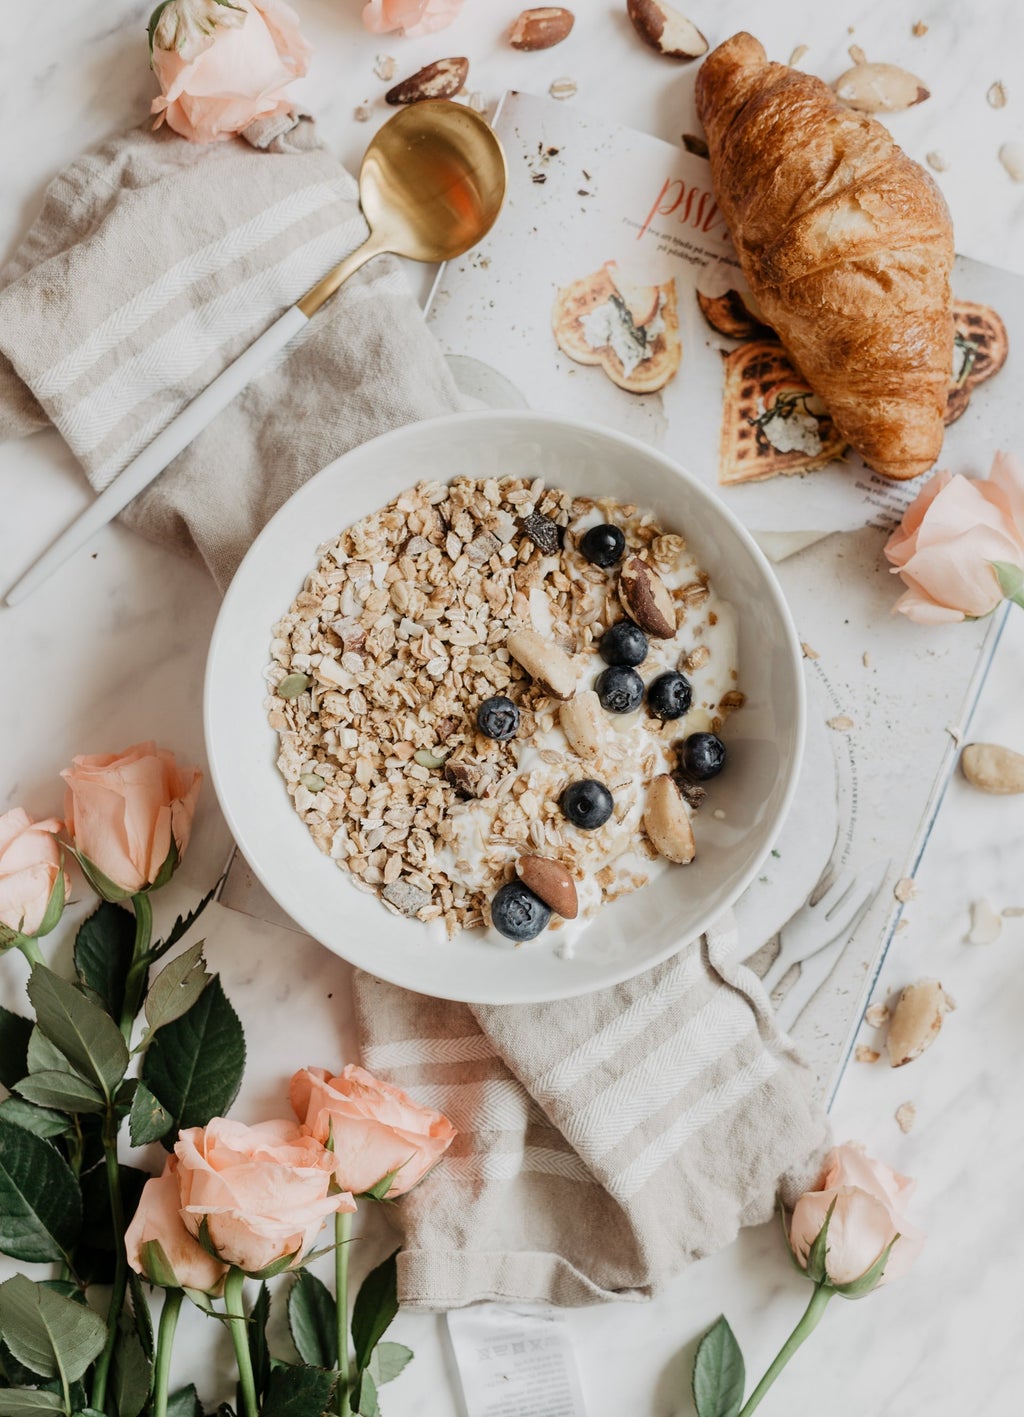 A lovely bowl of granola and berries surrounded by flowers and a croissant